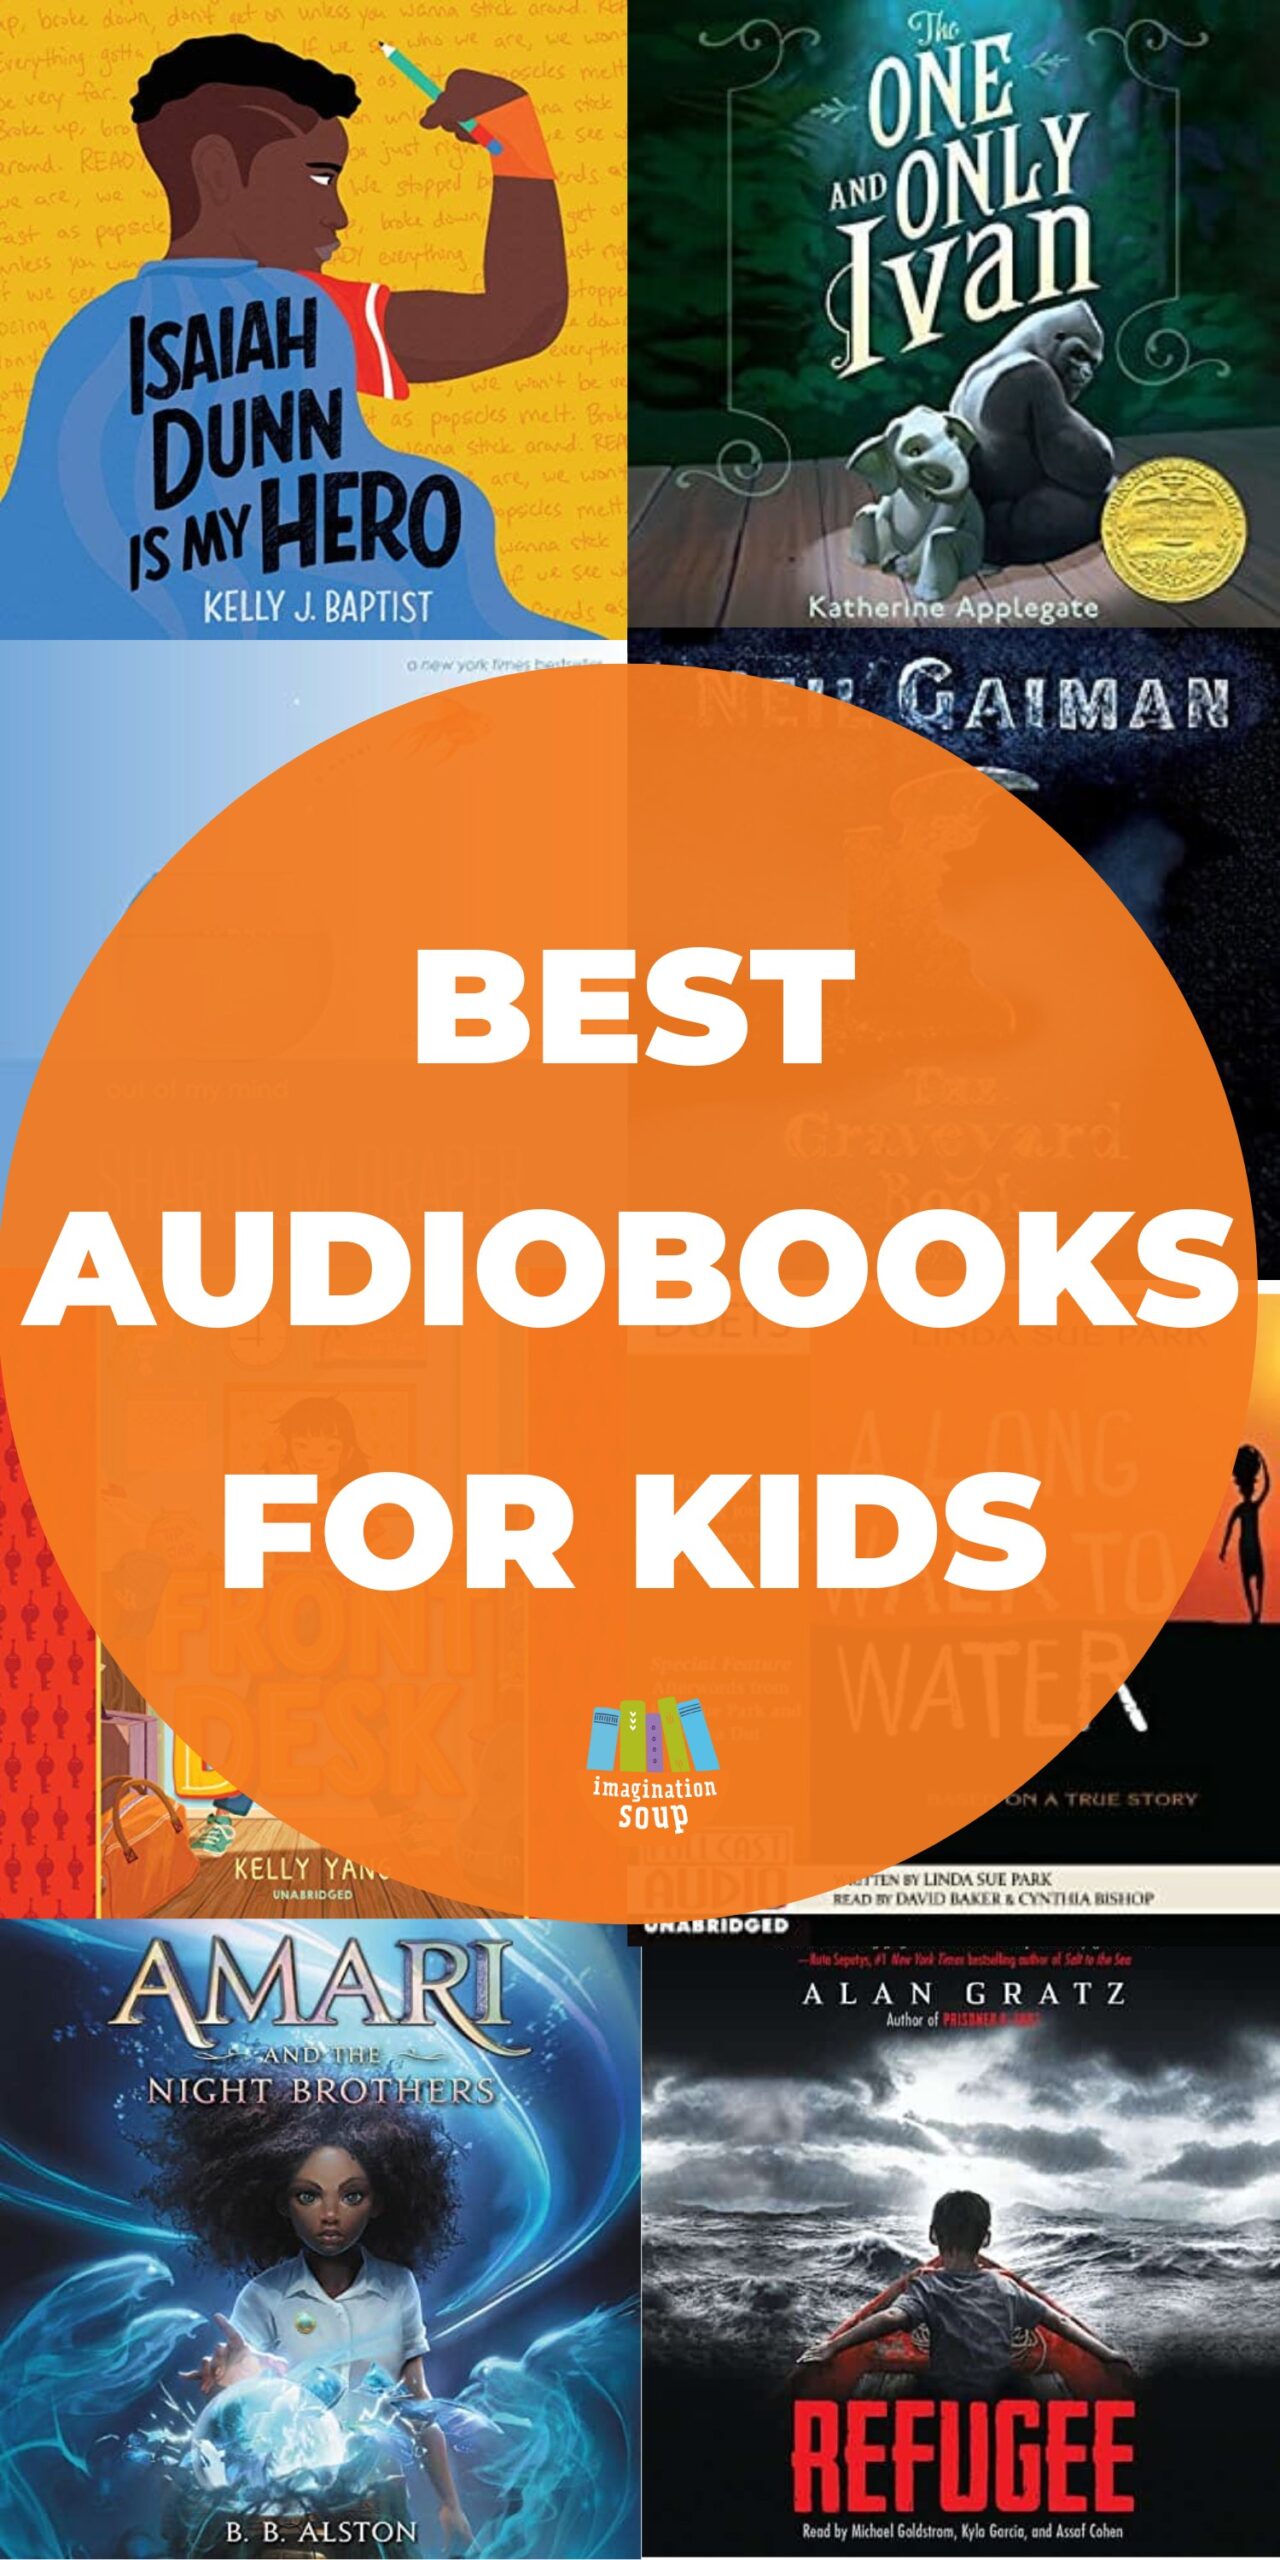 Want to get your kids ages 8 - 12 off screen time and reading more? Try audiobooks! This list gives you ideas of the best audiobooks for kids (tweens) that are also perfect for families with kids of different ages and genders.